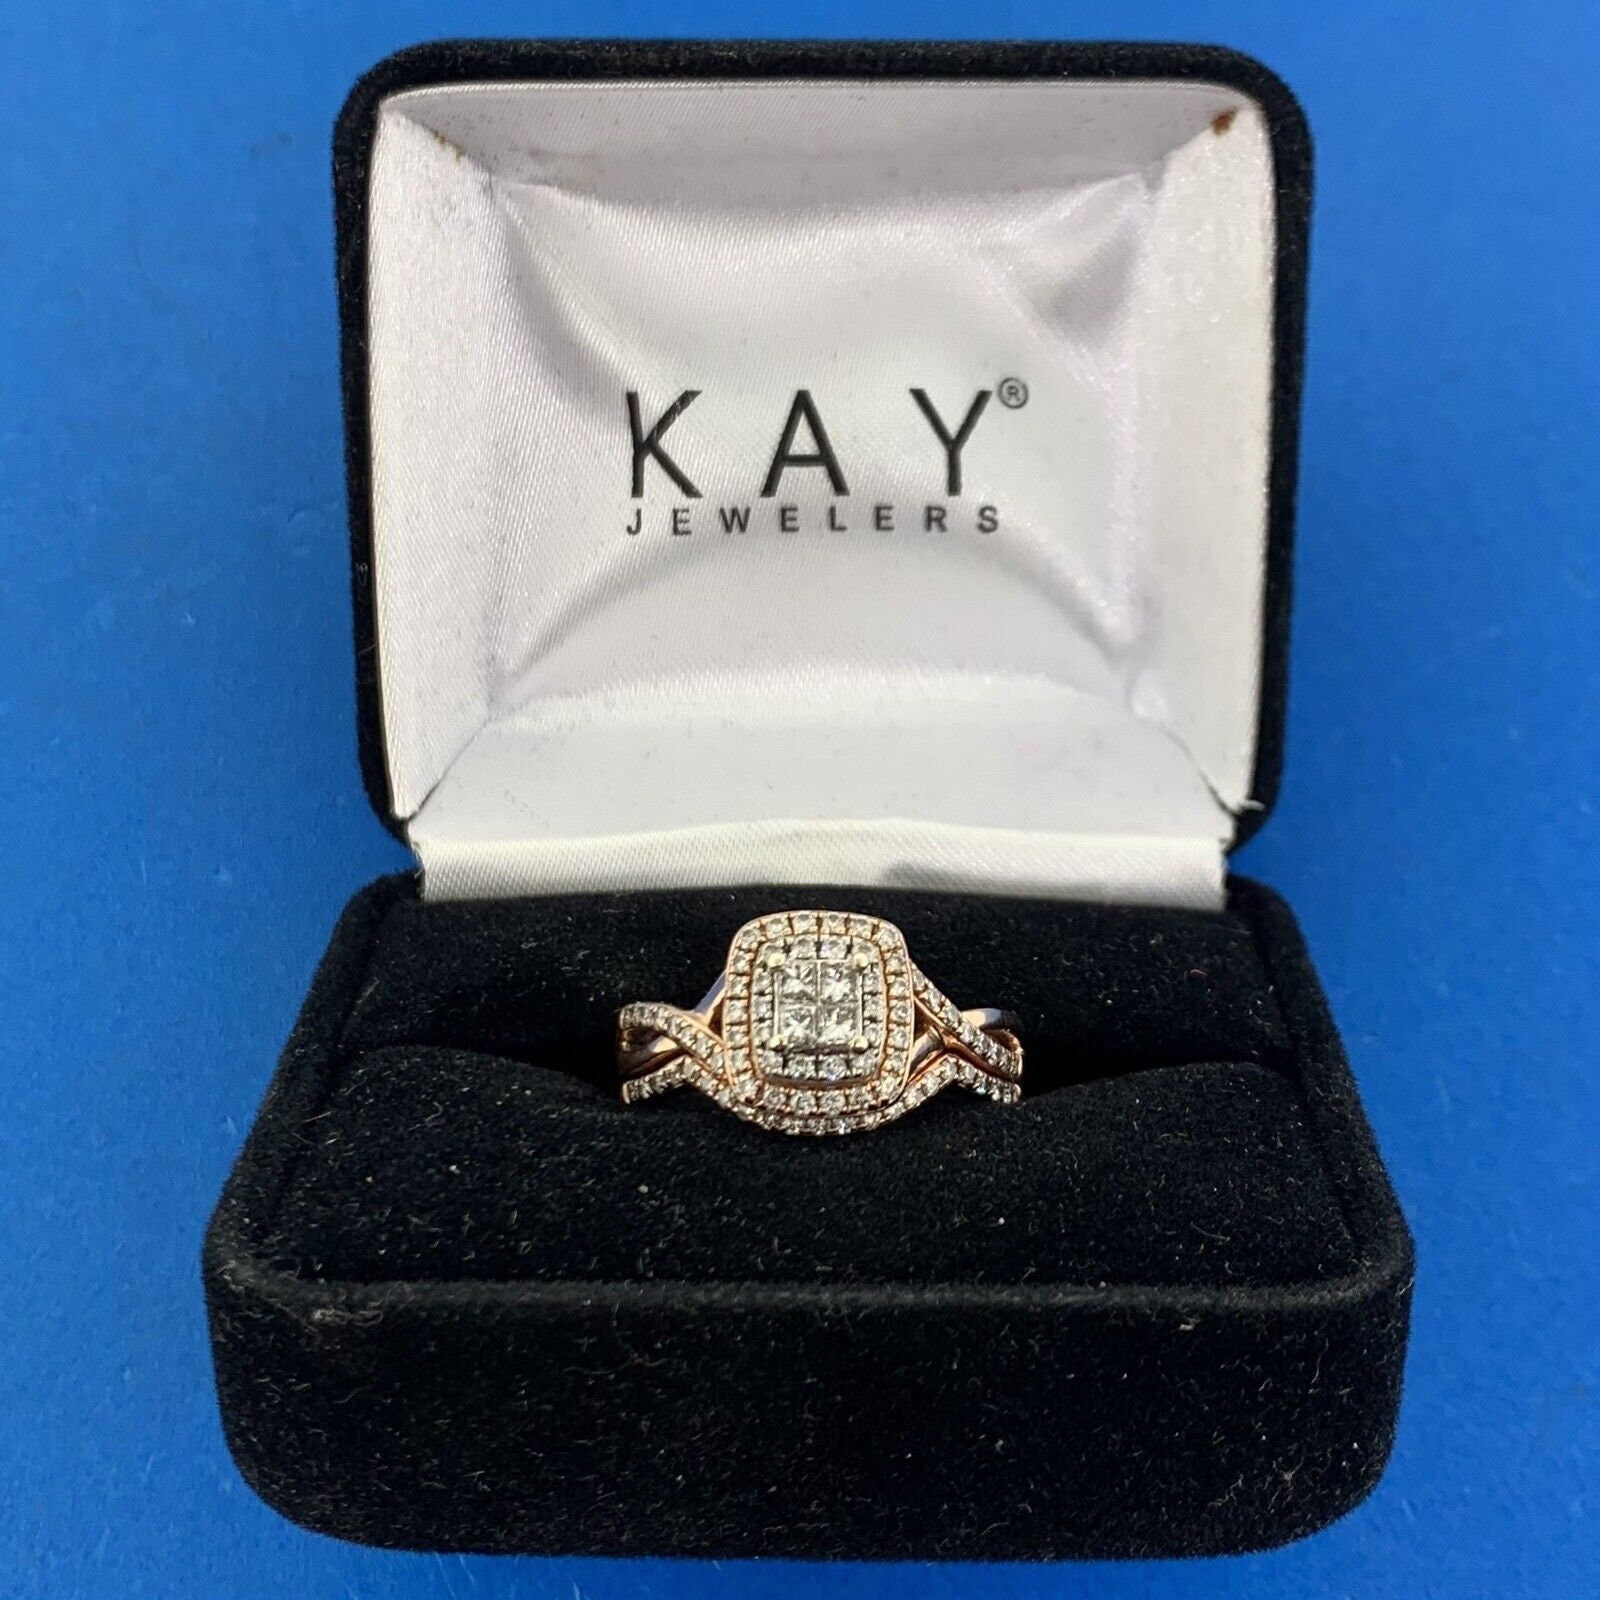 Kay Jewelers Halo Diamond Engagement Ring with Rose Gold accents size 8 |  eBay